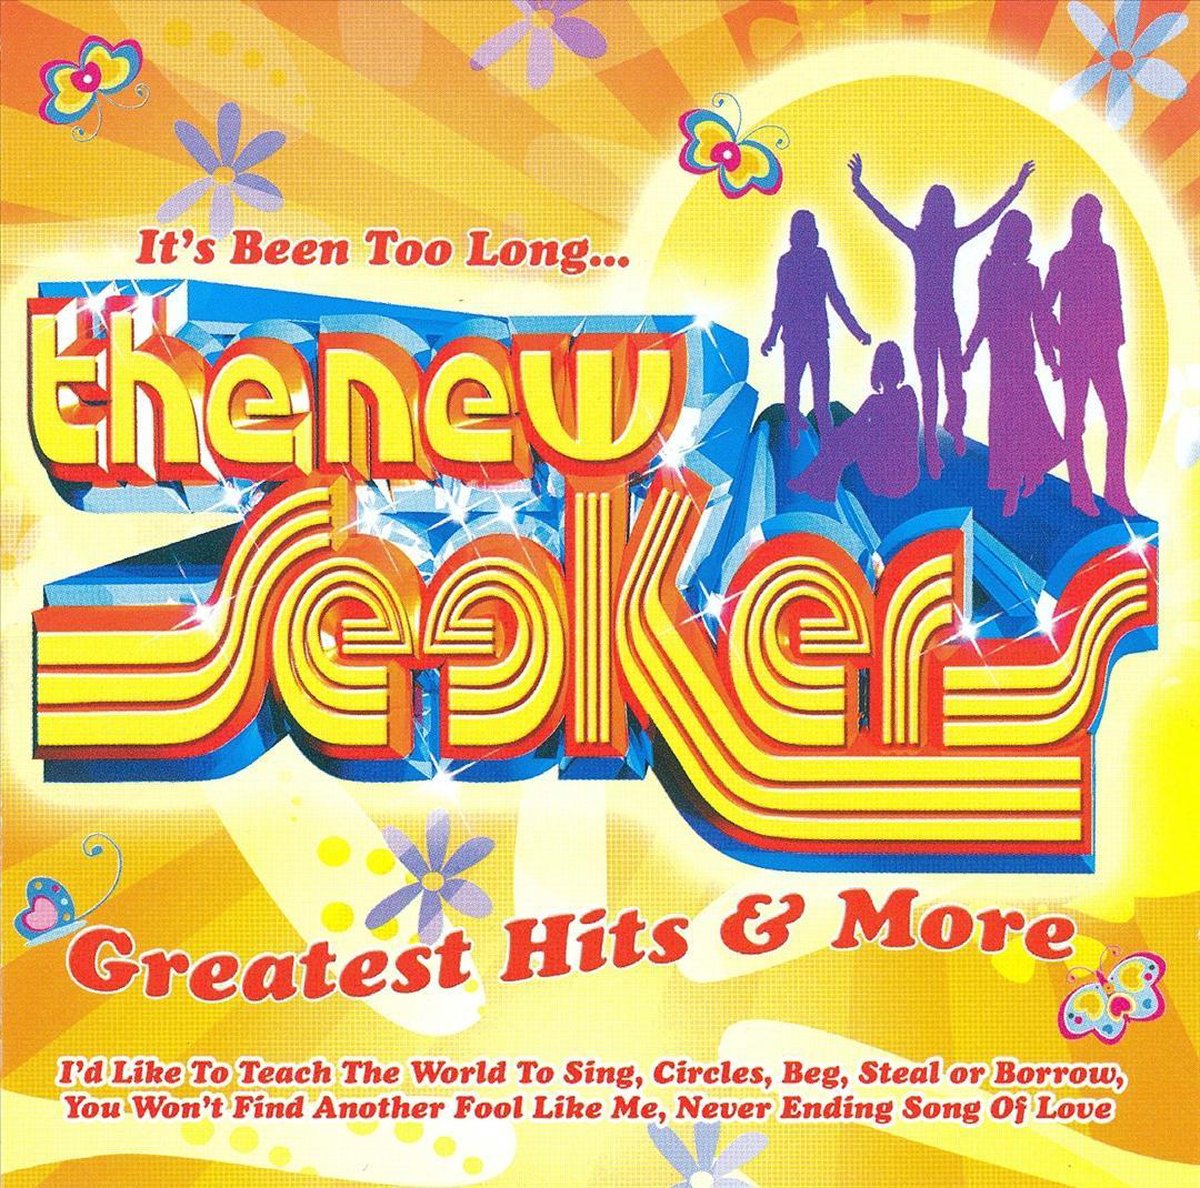 Its Been Too Long: Greatest Hits New Seekers - The New Seekers